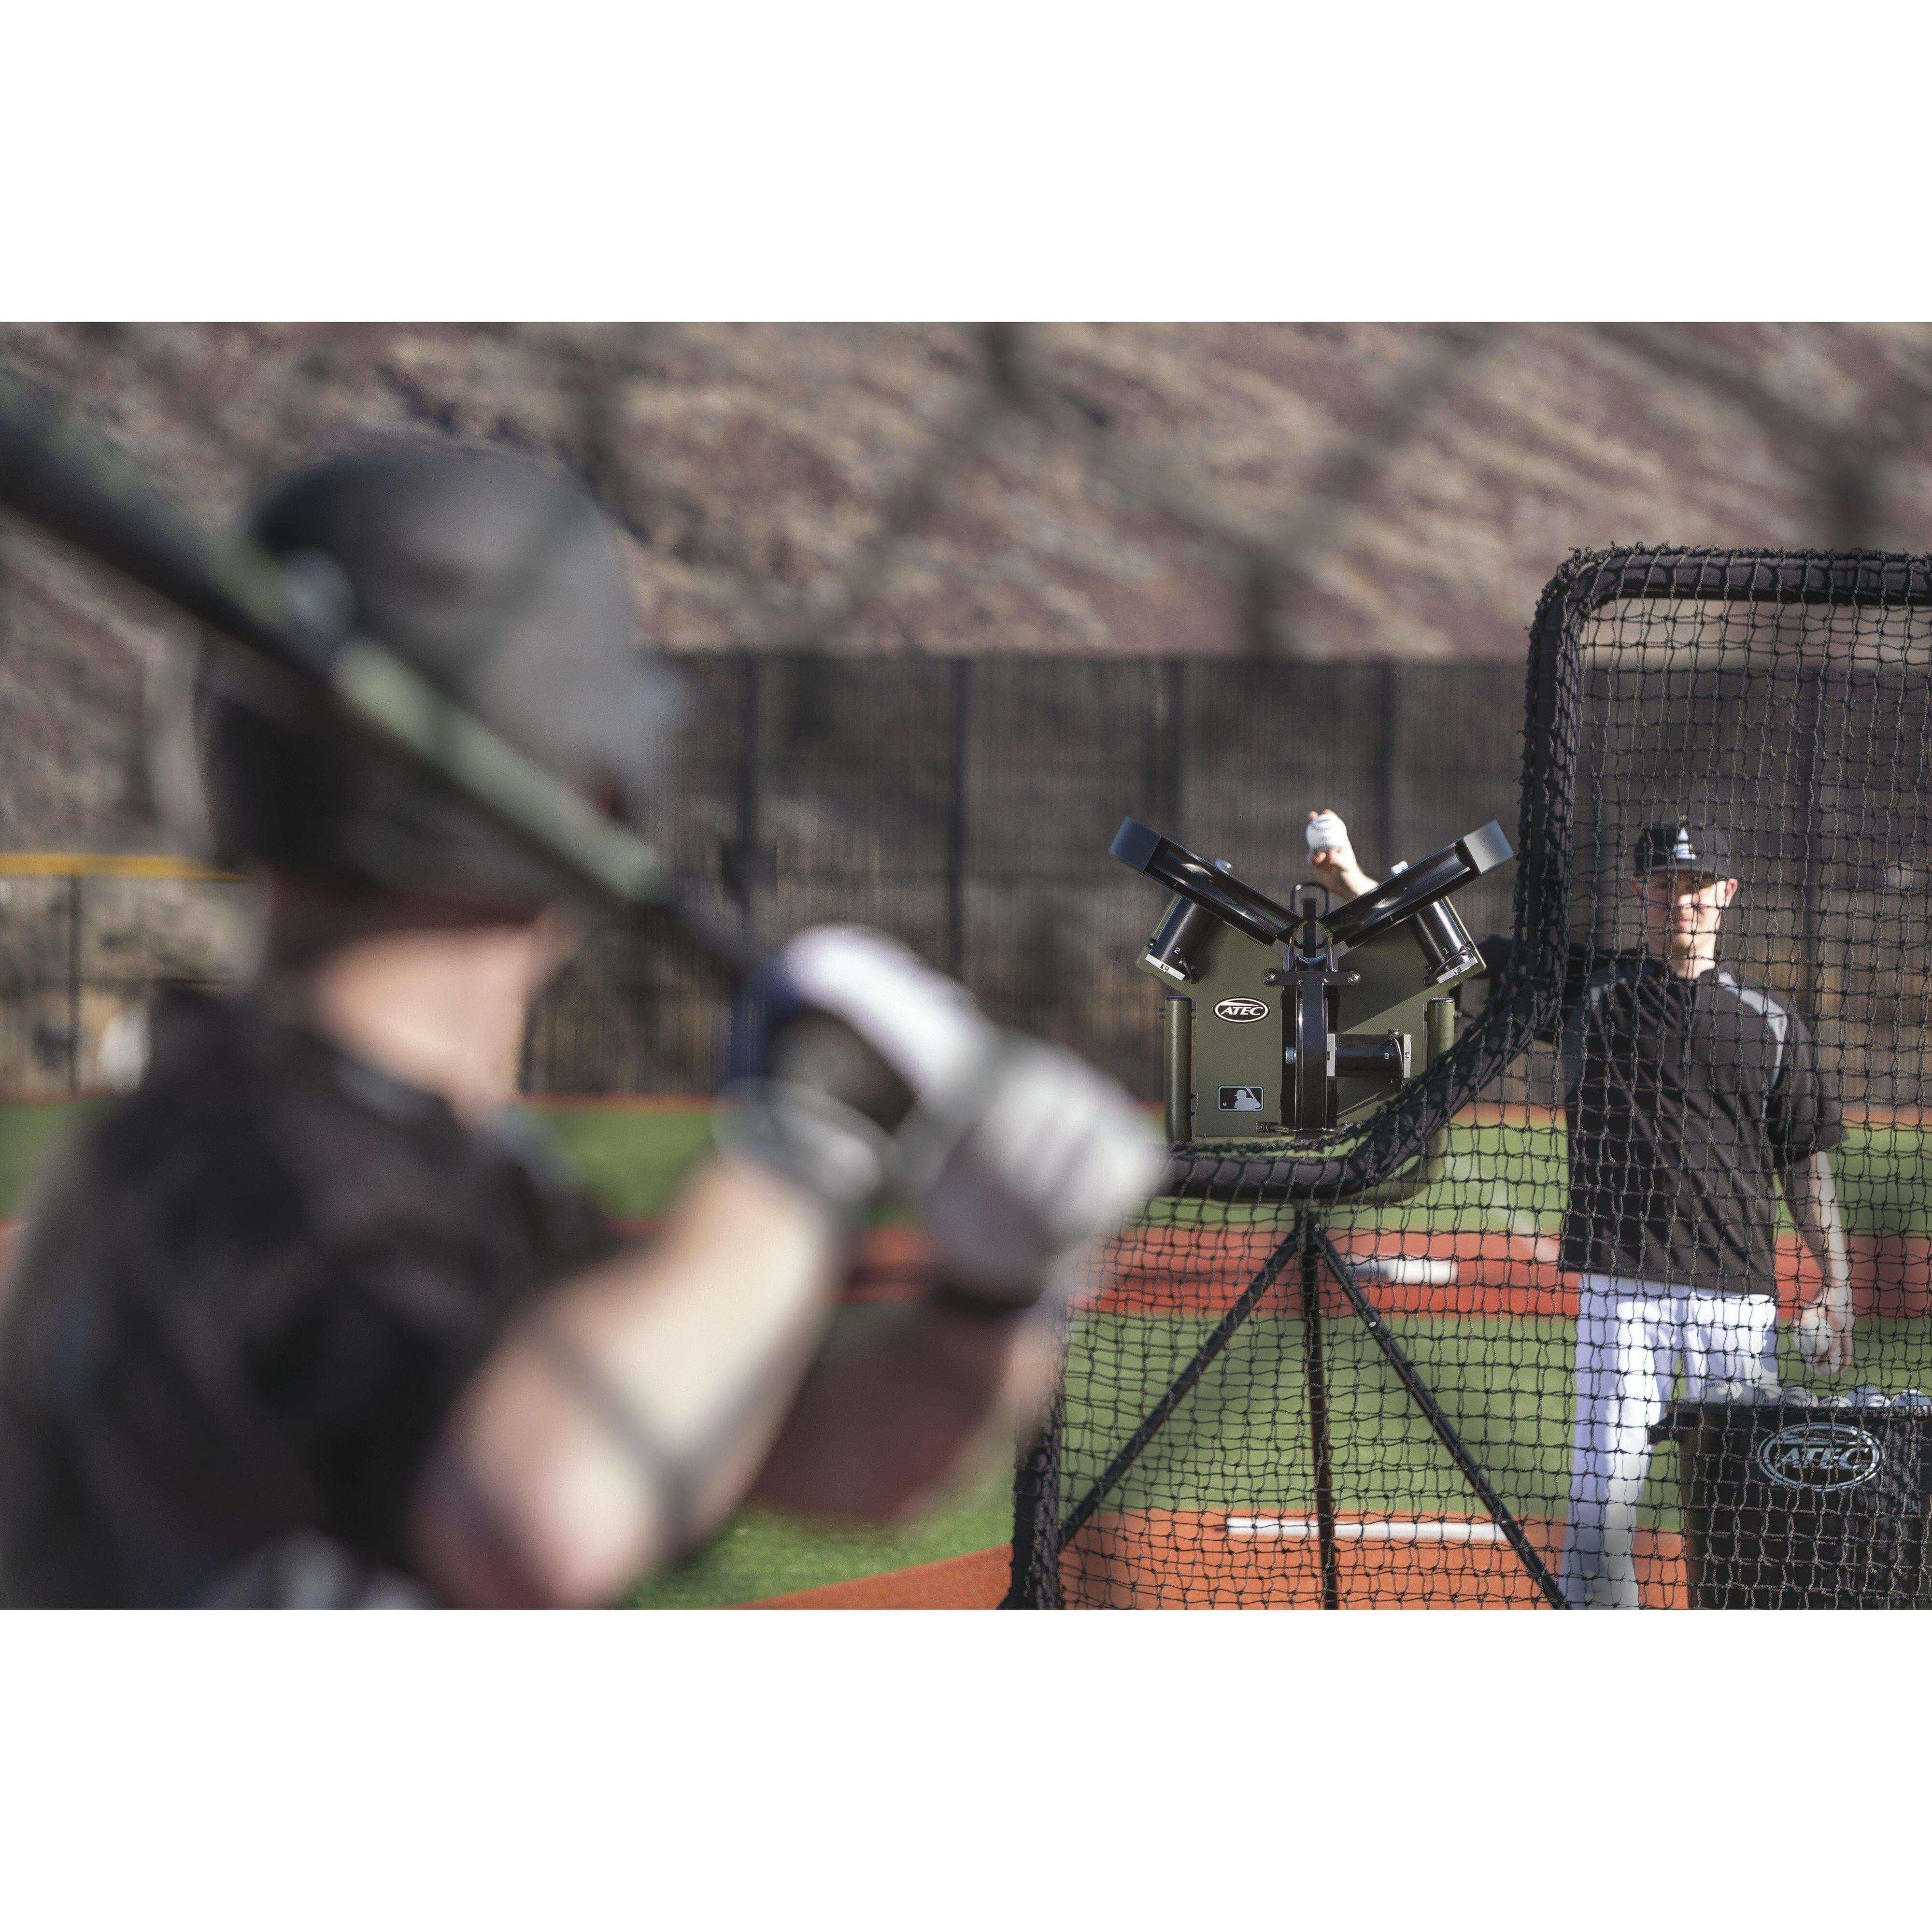 What are “Simulated Speeds” for a Pitching Machine?